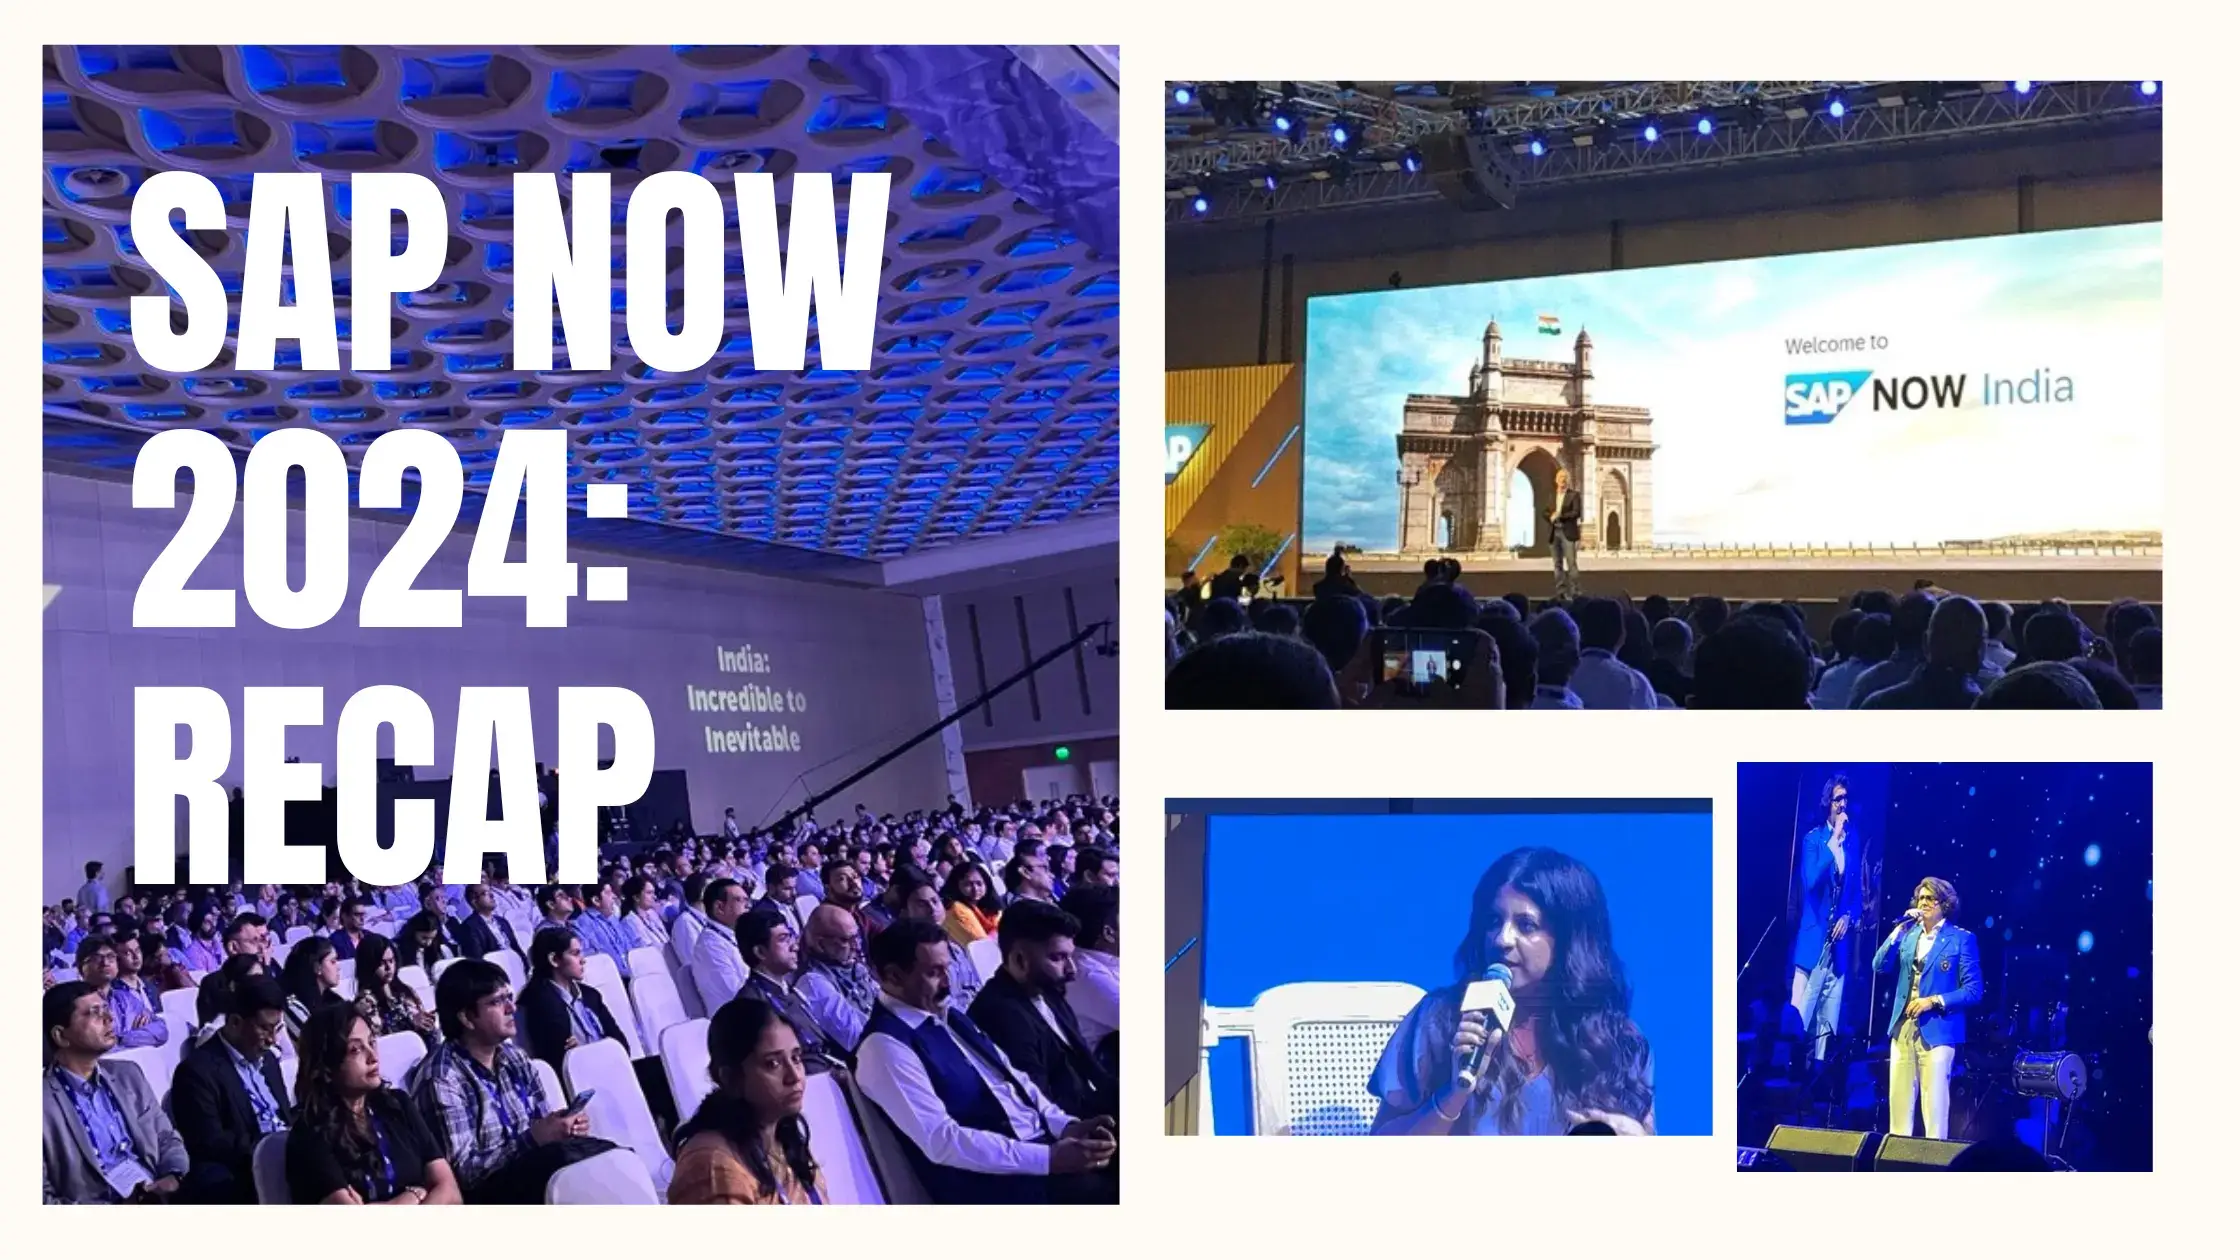 SAP NOW 2024 Recap: Highlights and Key Takeaways from SAP’s Most Coveted Annual Event in Mumbai 